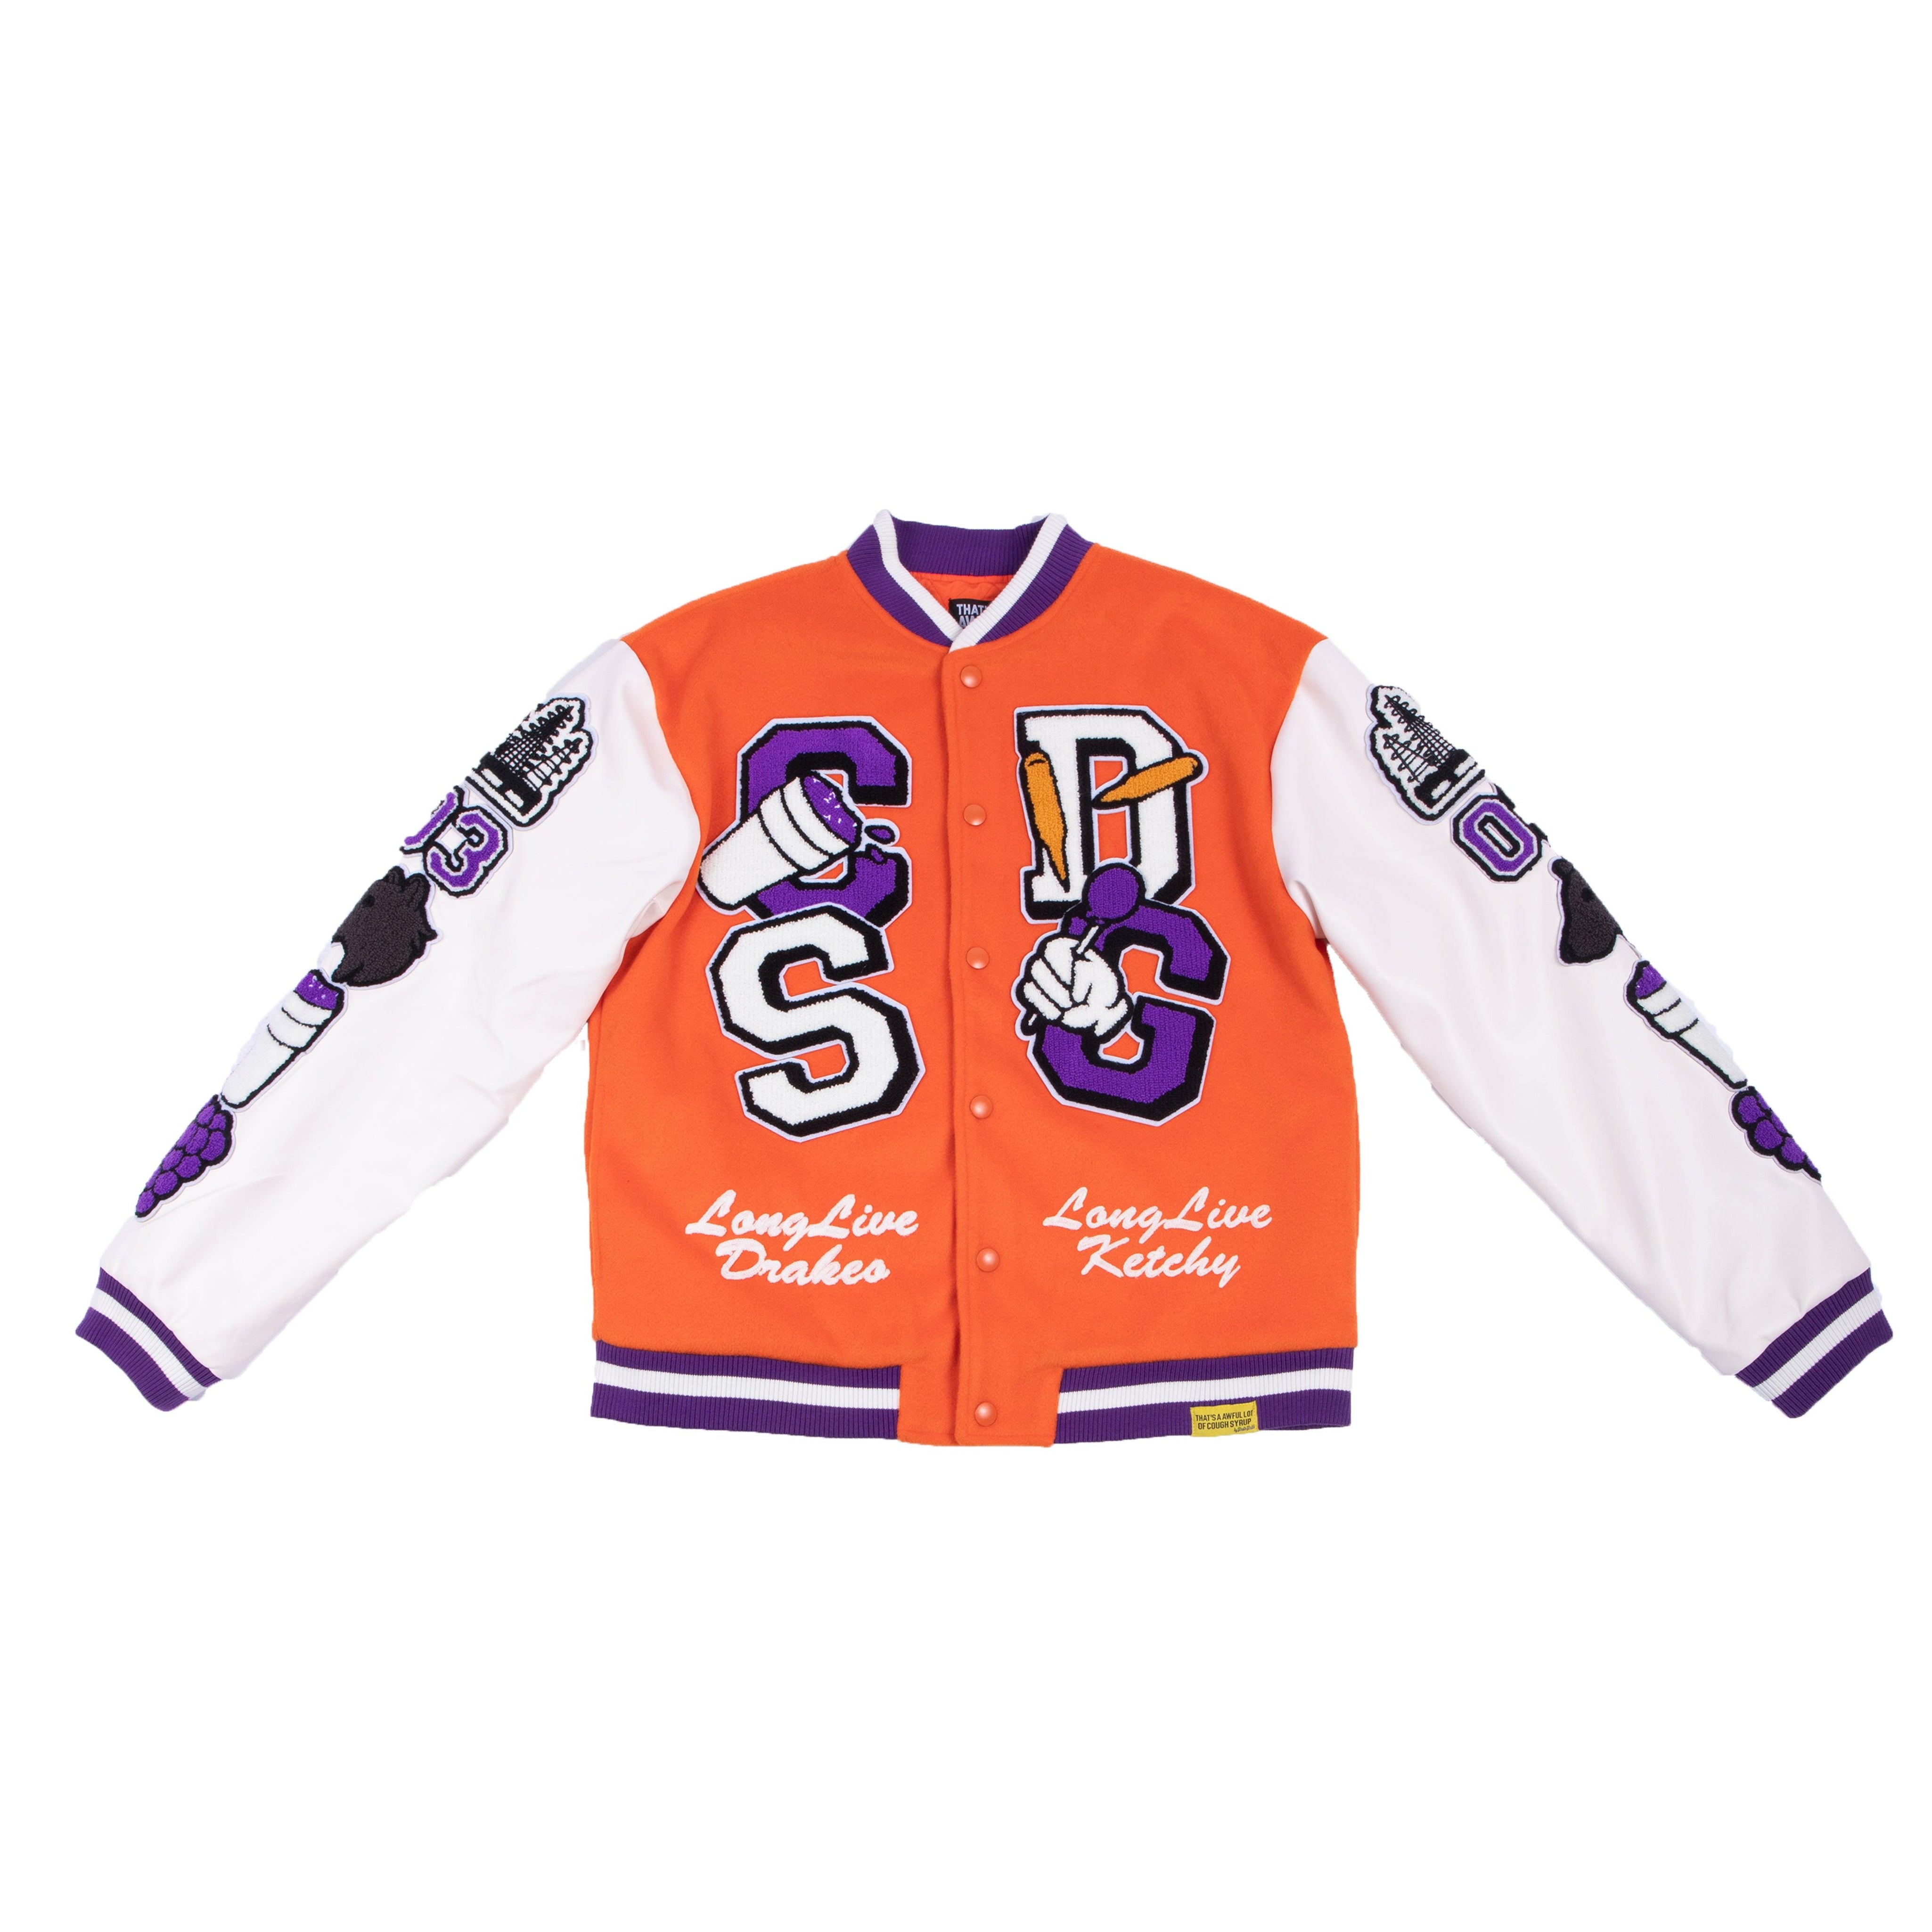 03 Greedo Letterman Jacket - THATS A AWFUL LOT OF...